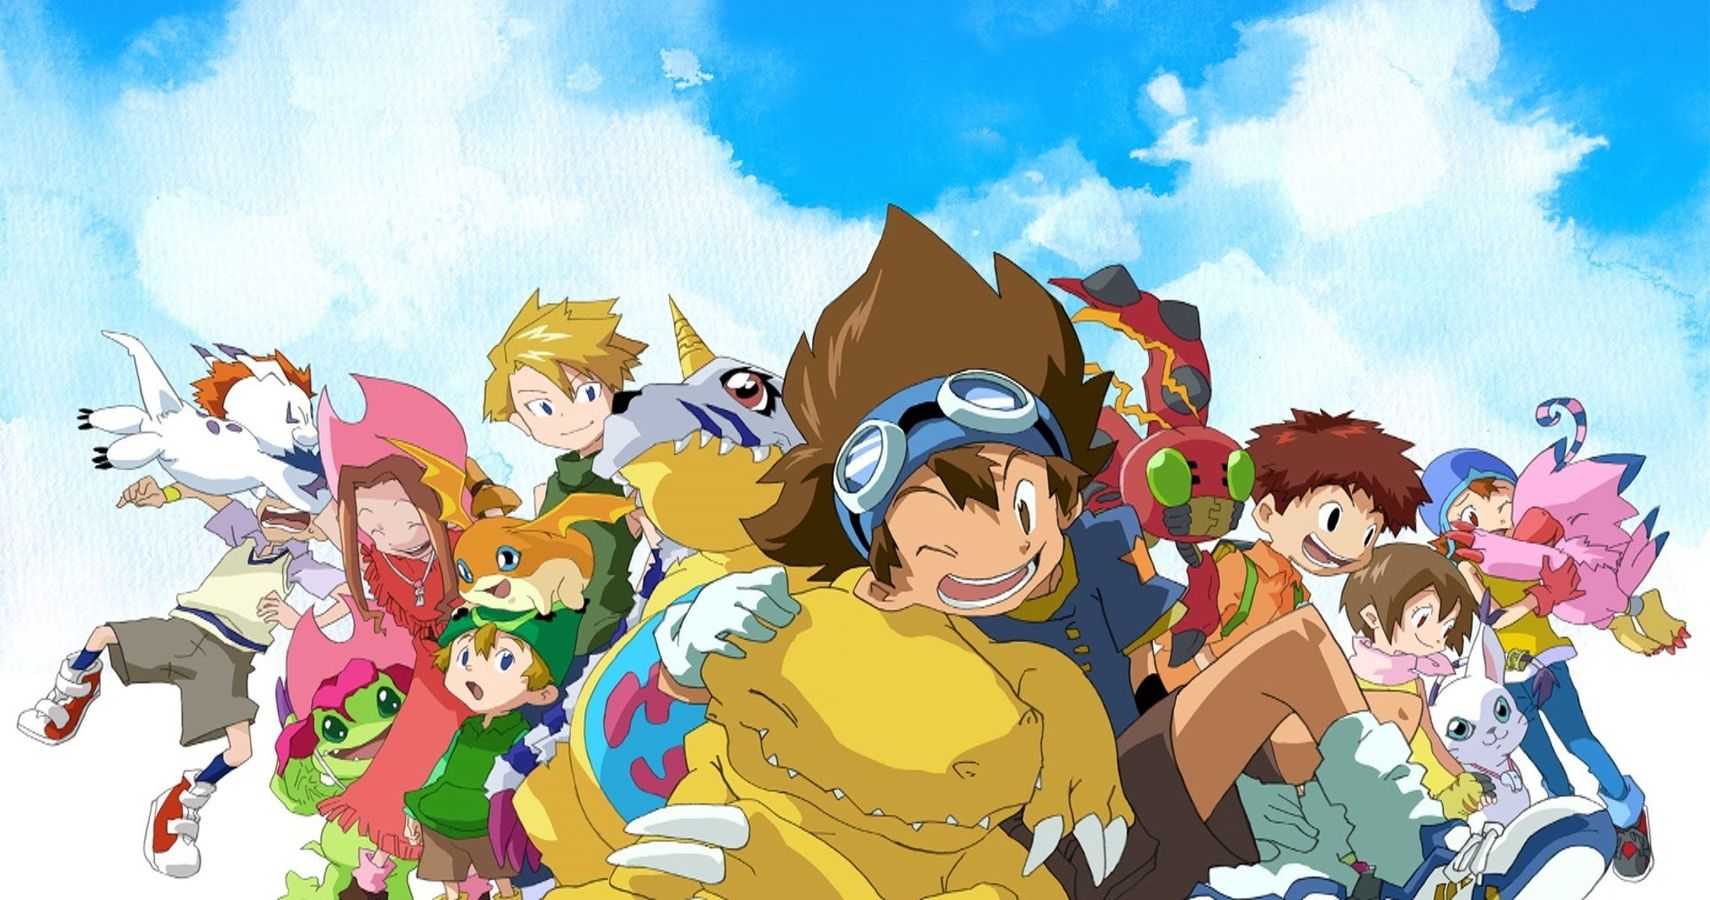 The cast of Digimon Adventure together. 